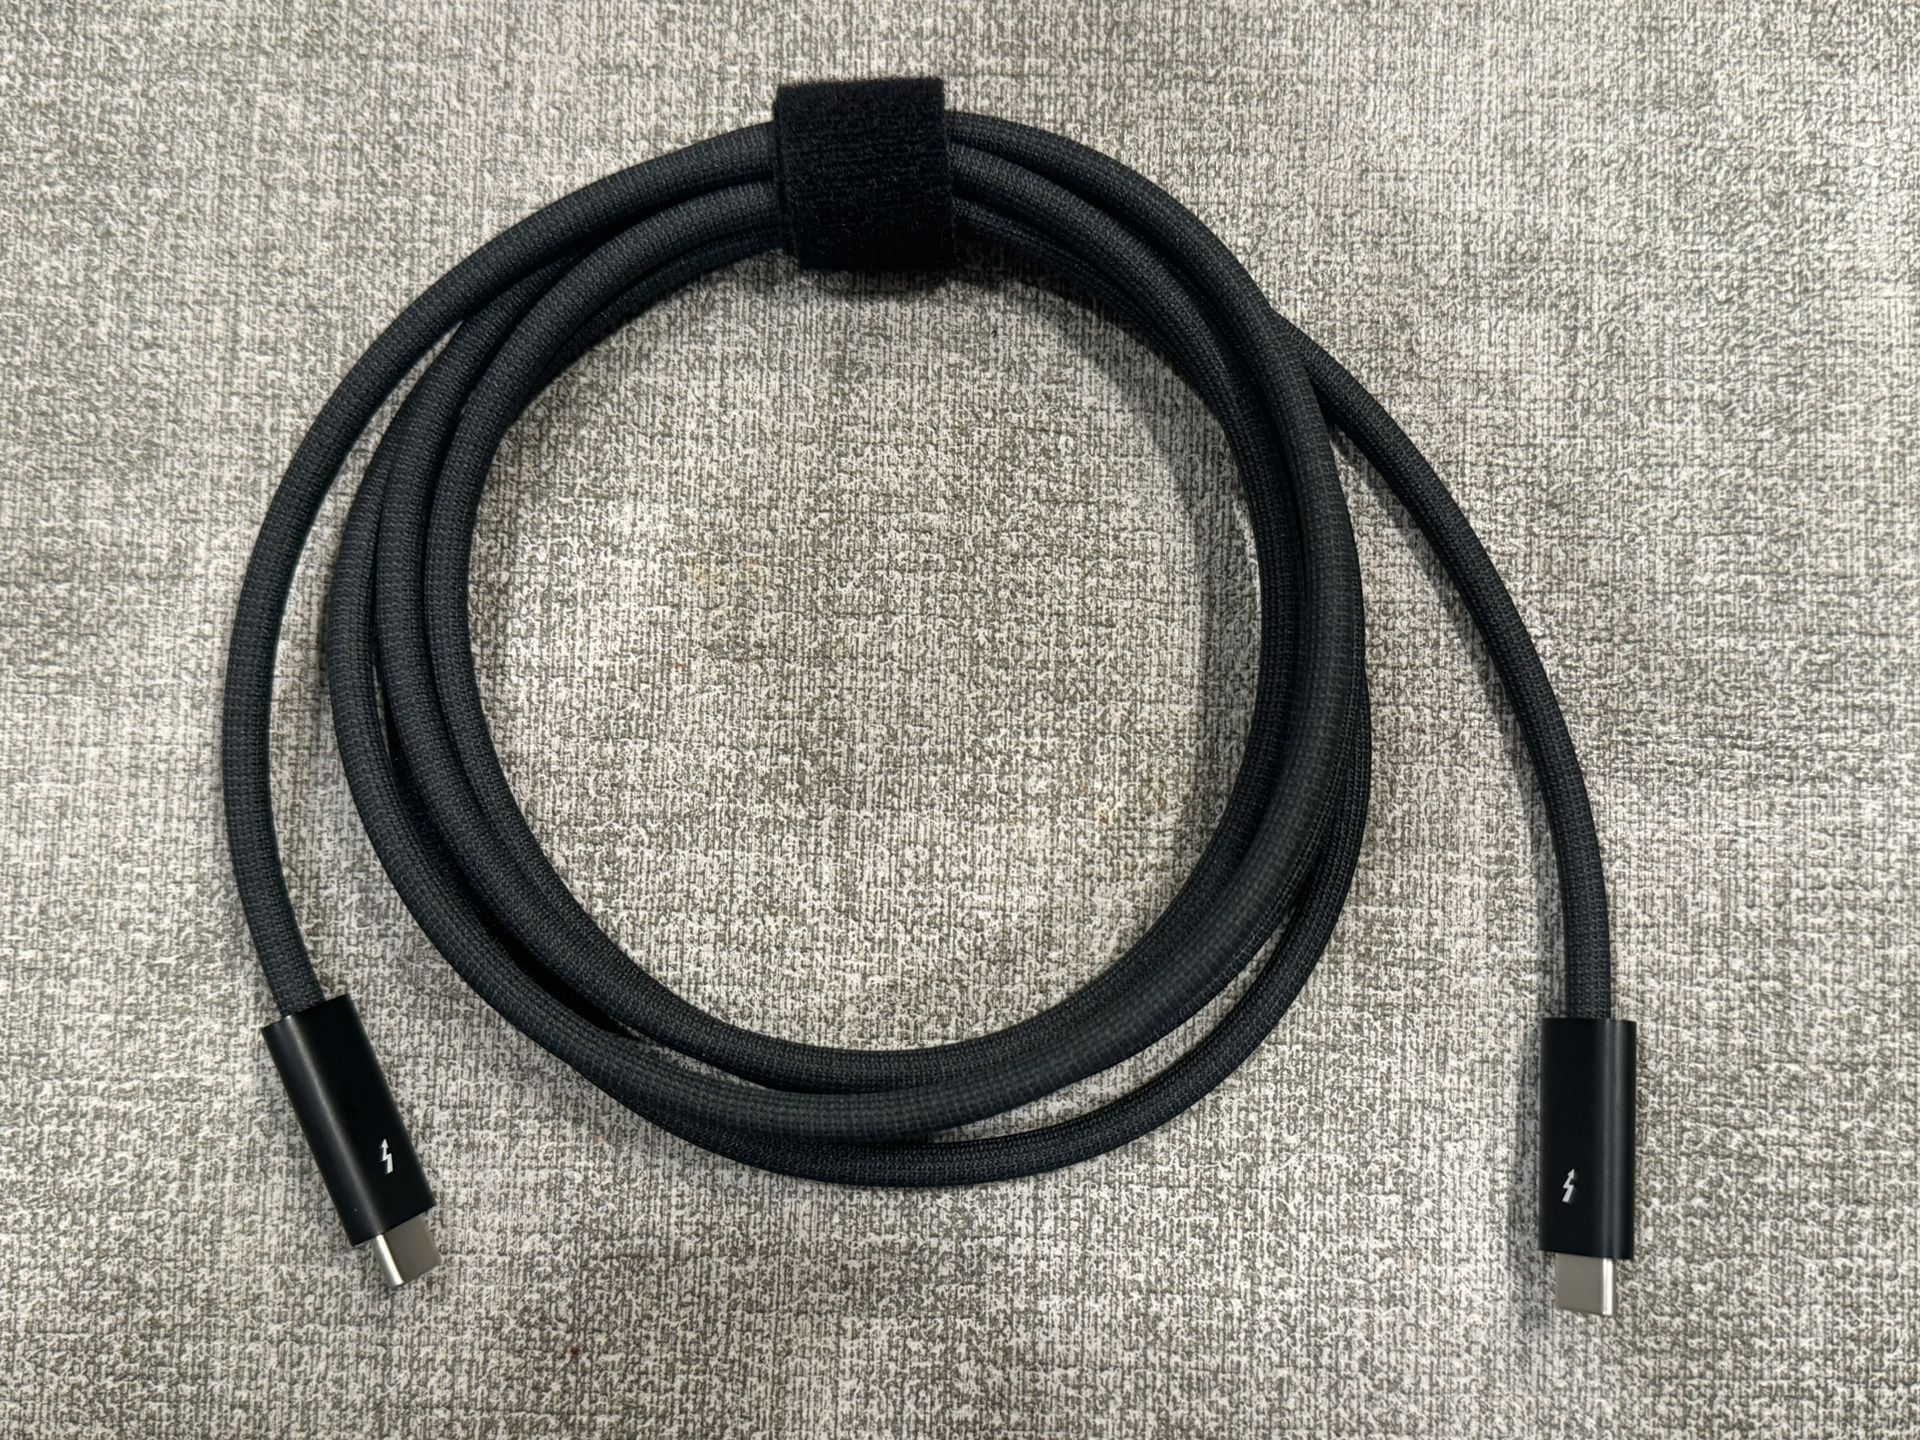 Apple Thunderbolt 4 USB-C Cable (1 meter, 3 ft)